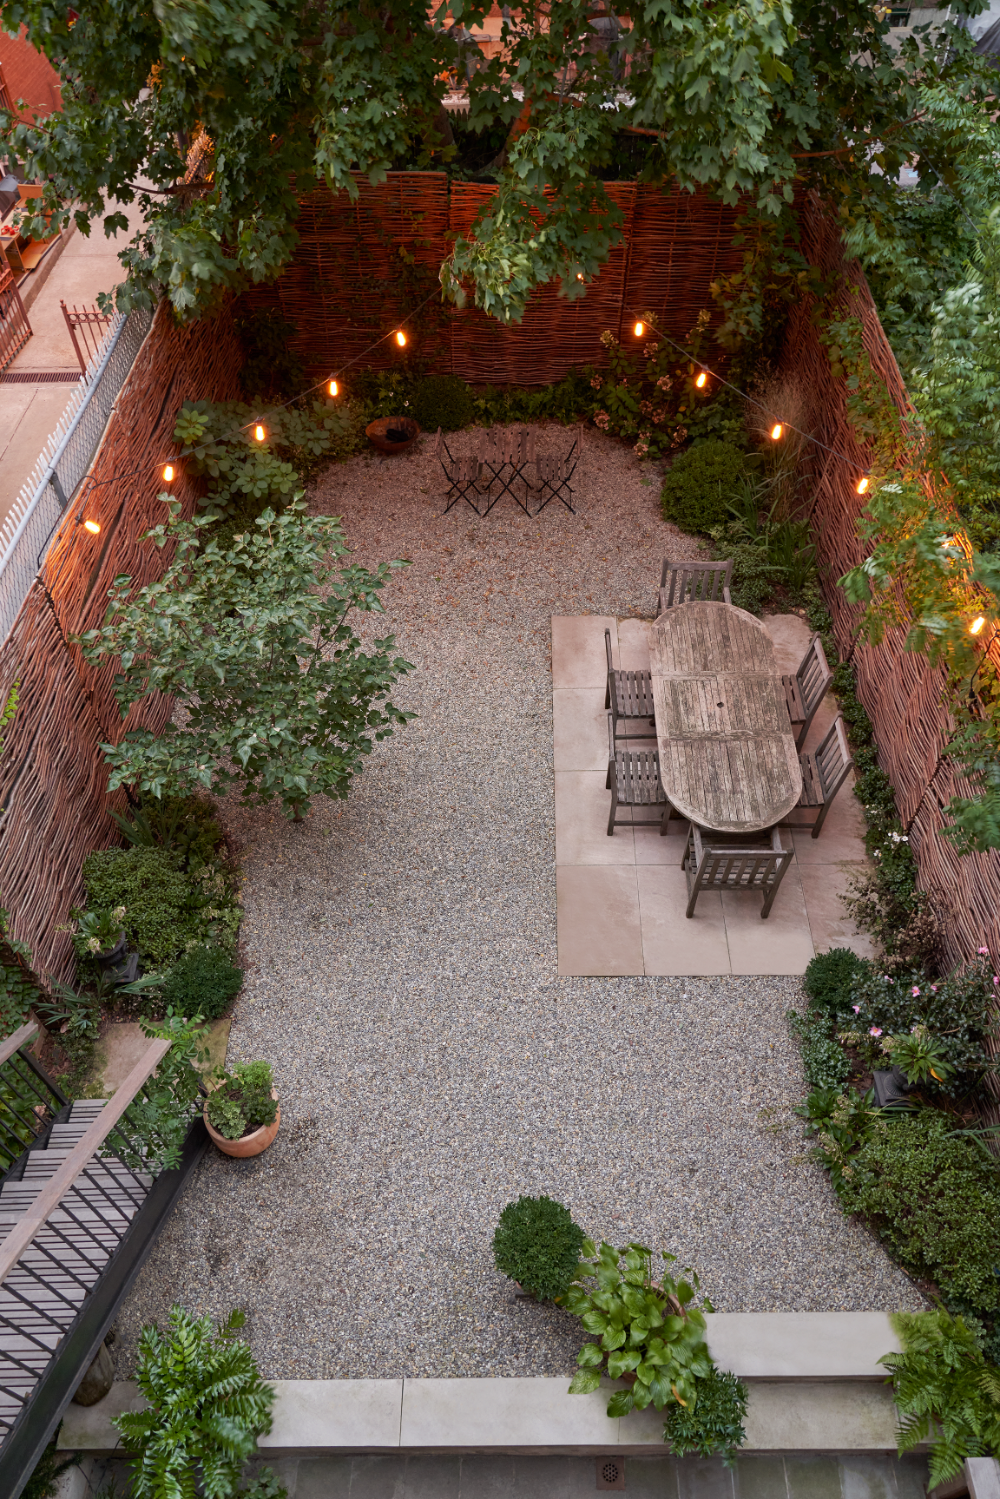 Creating a Beautiful Outdoor Oasis with a Garden Patio